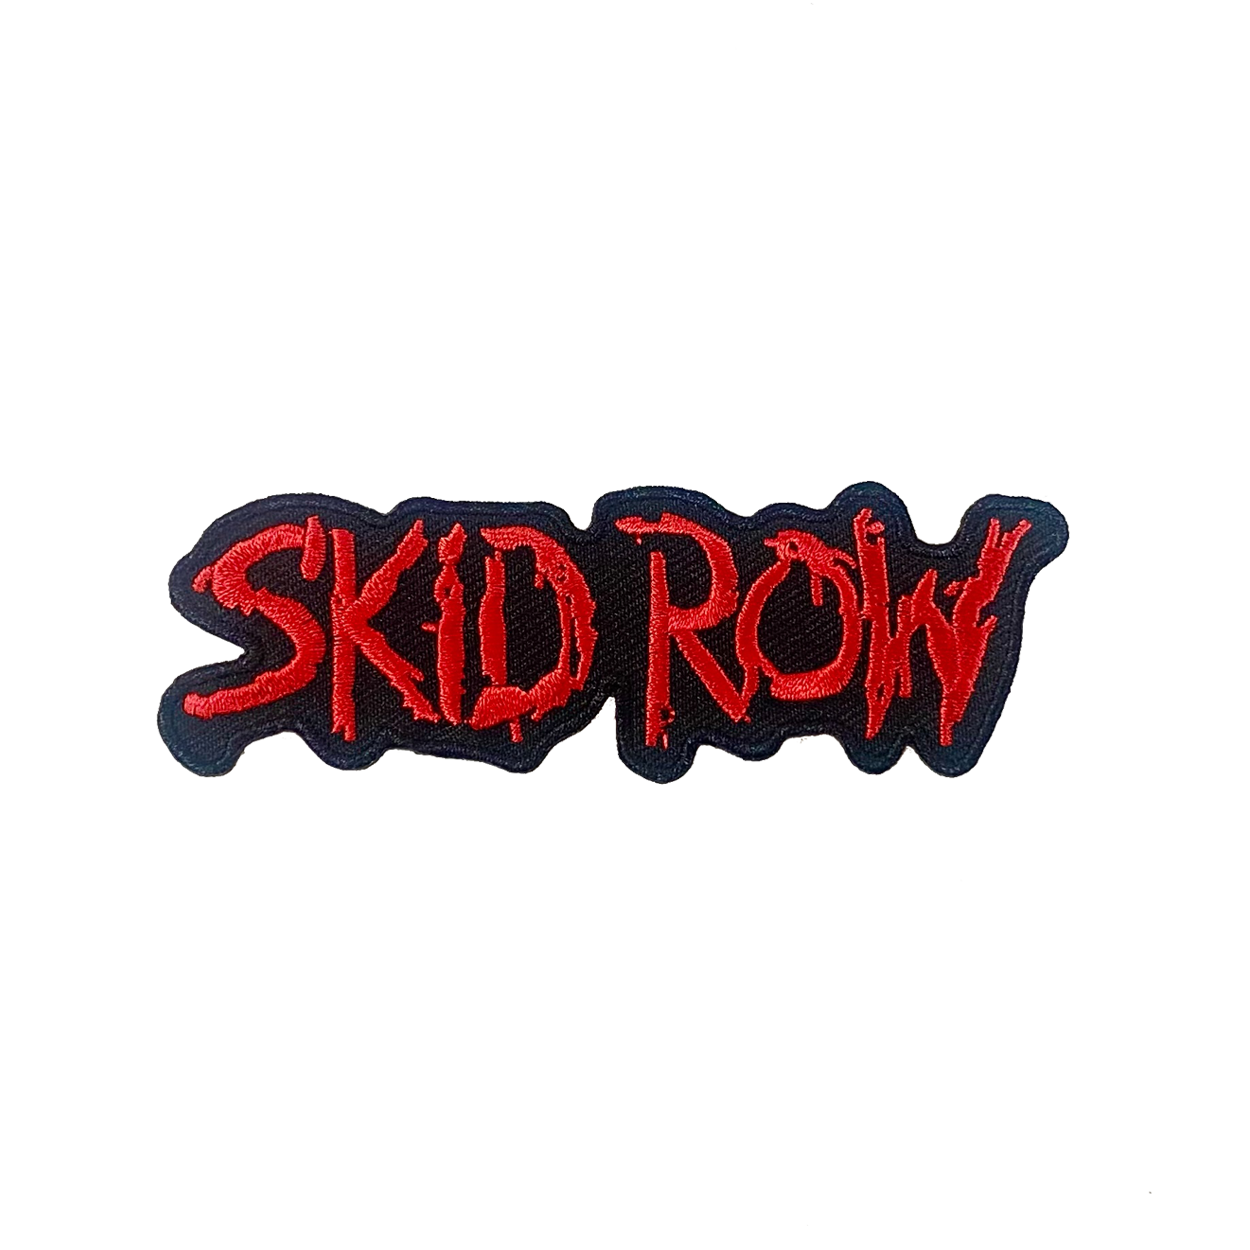 SKID ROW LOGO EMBROIDERED PATCH